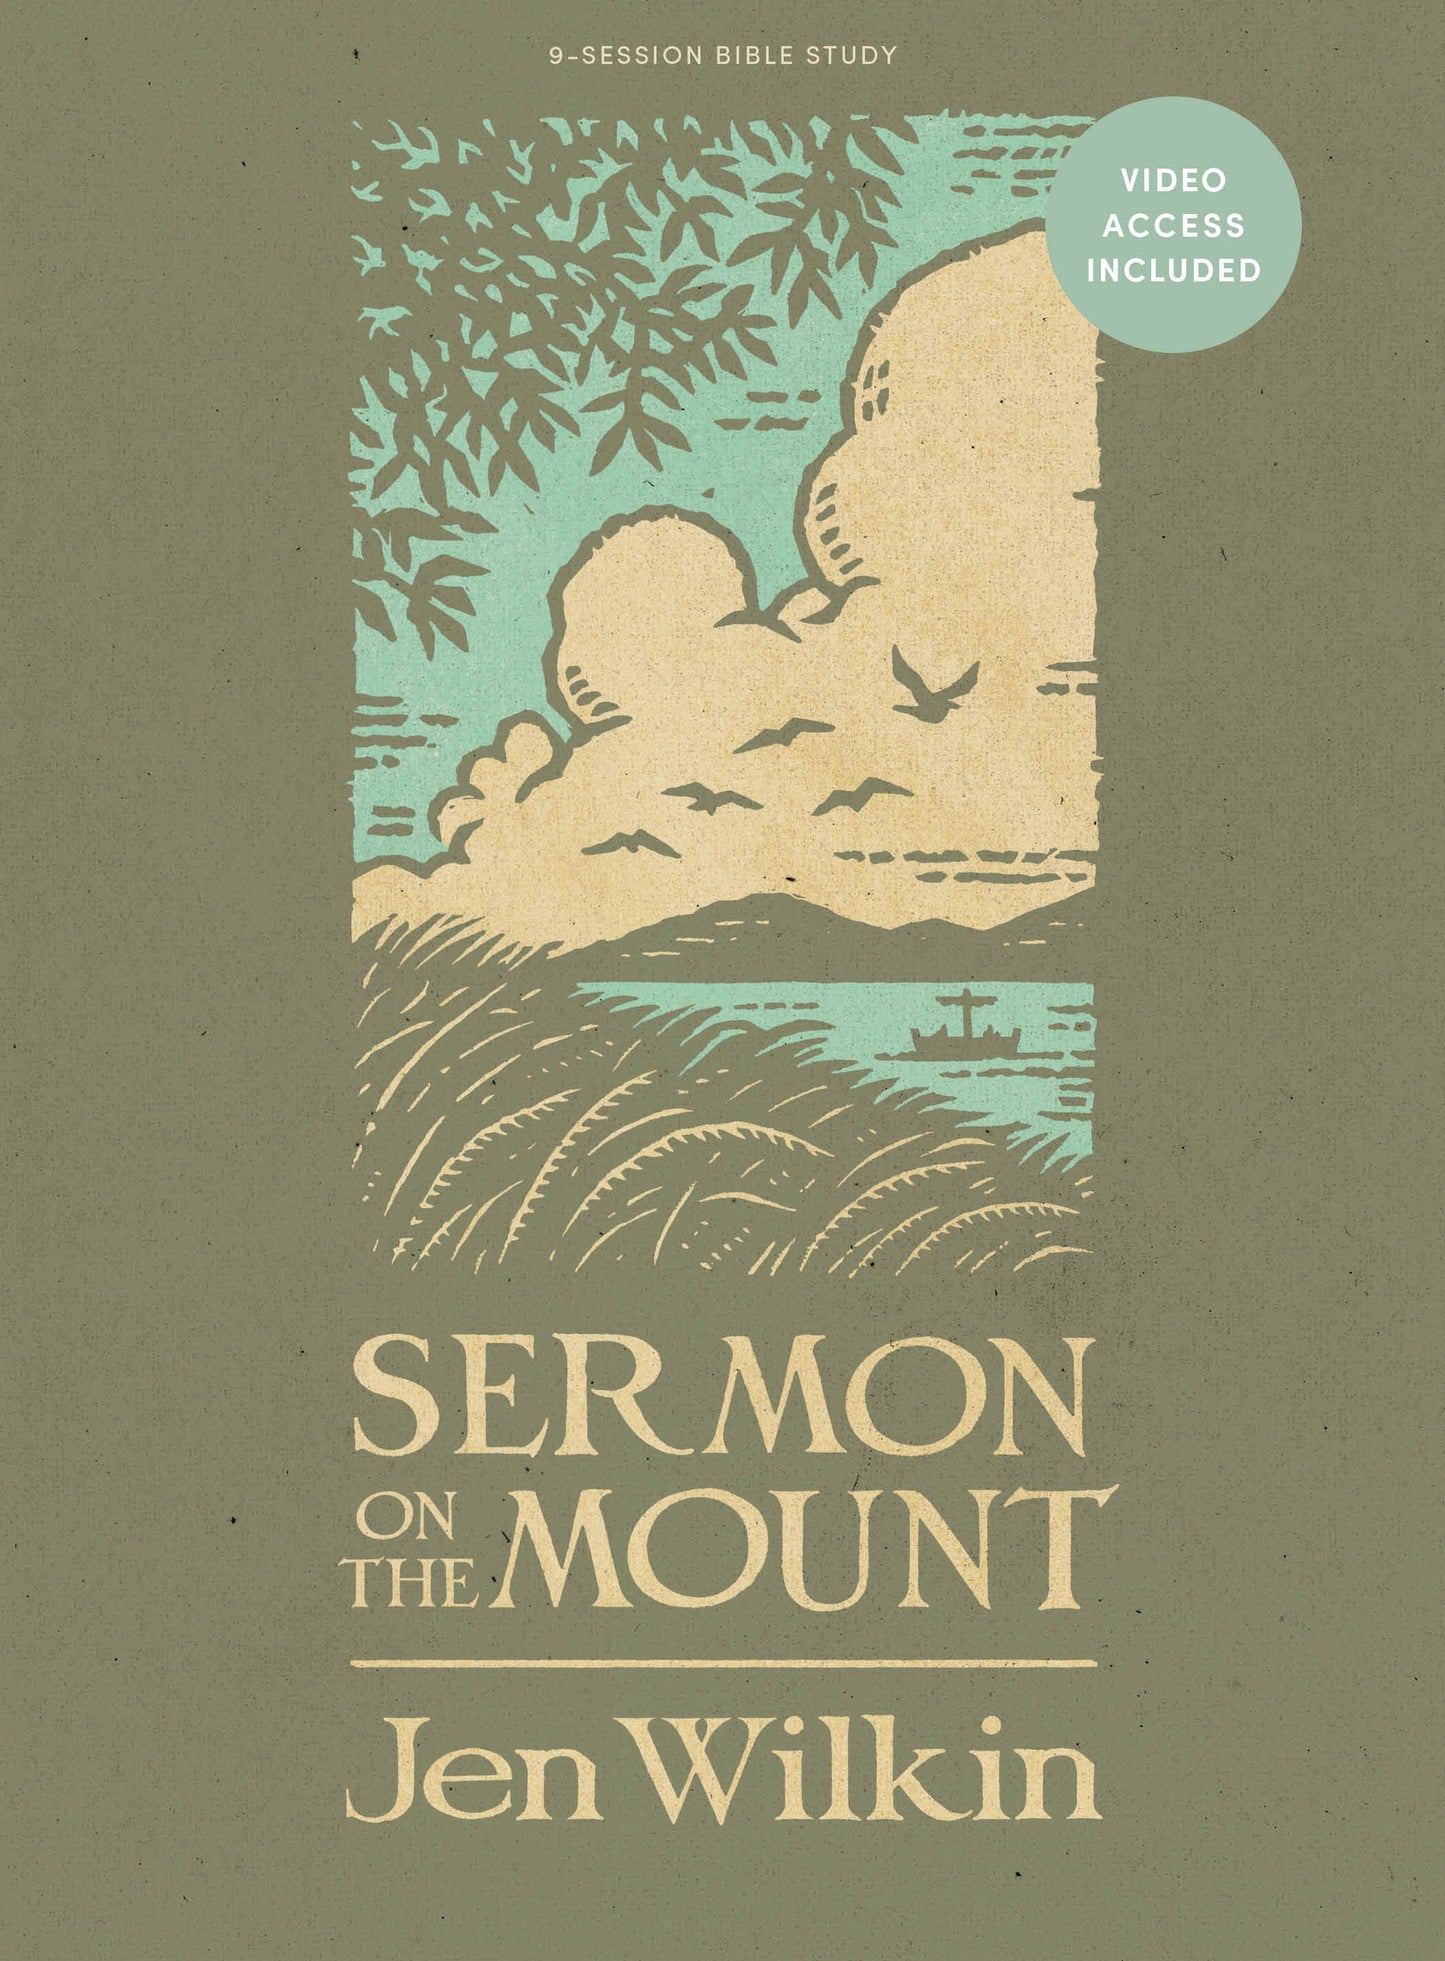 Sermon On The Mount Bible Study Book (Revised & Expanded) With Video Access